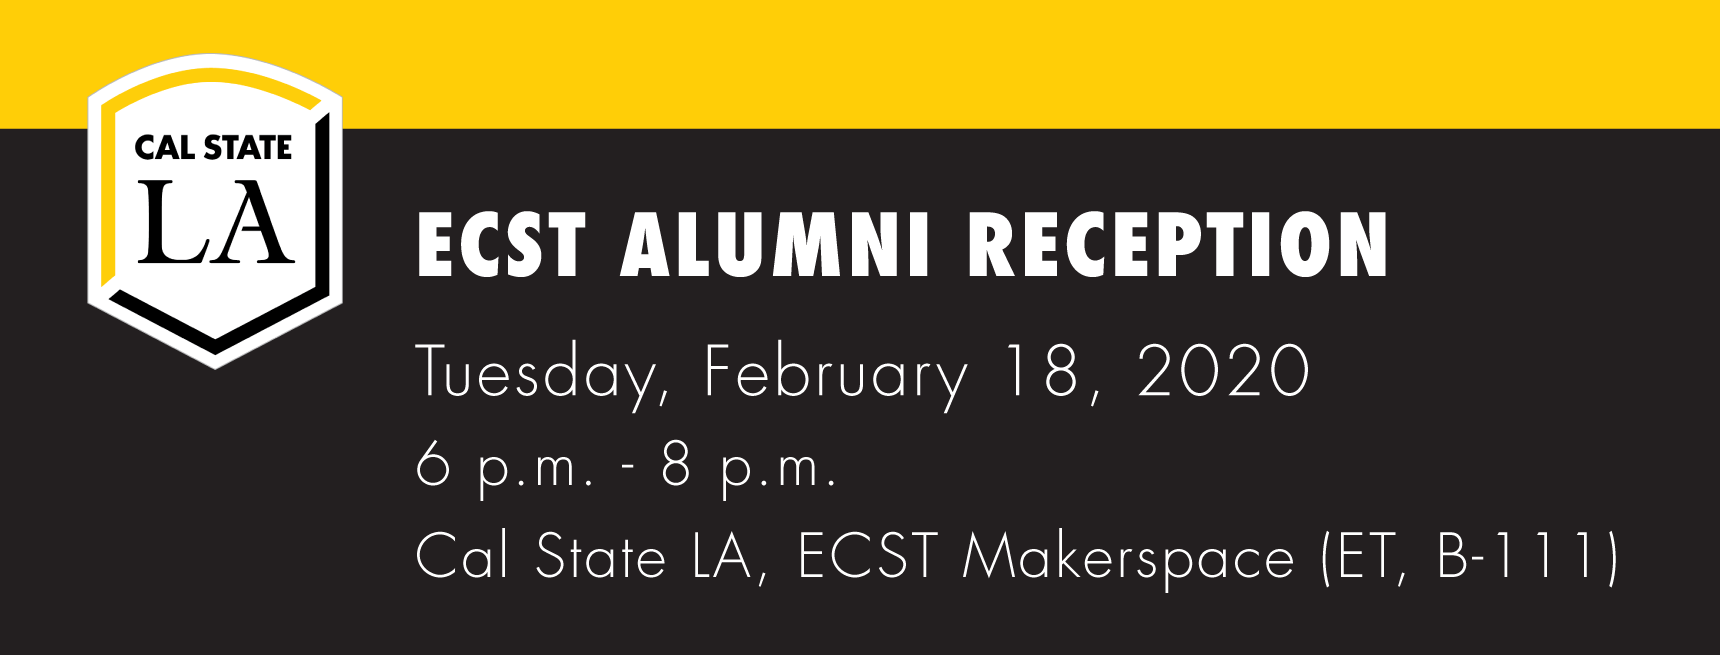 ECST Alumni Network Reception on Tuesday, February 18, 2020 from 6-8 p.m. at Cal State LA. 